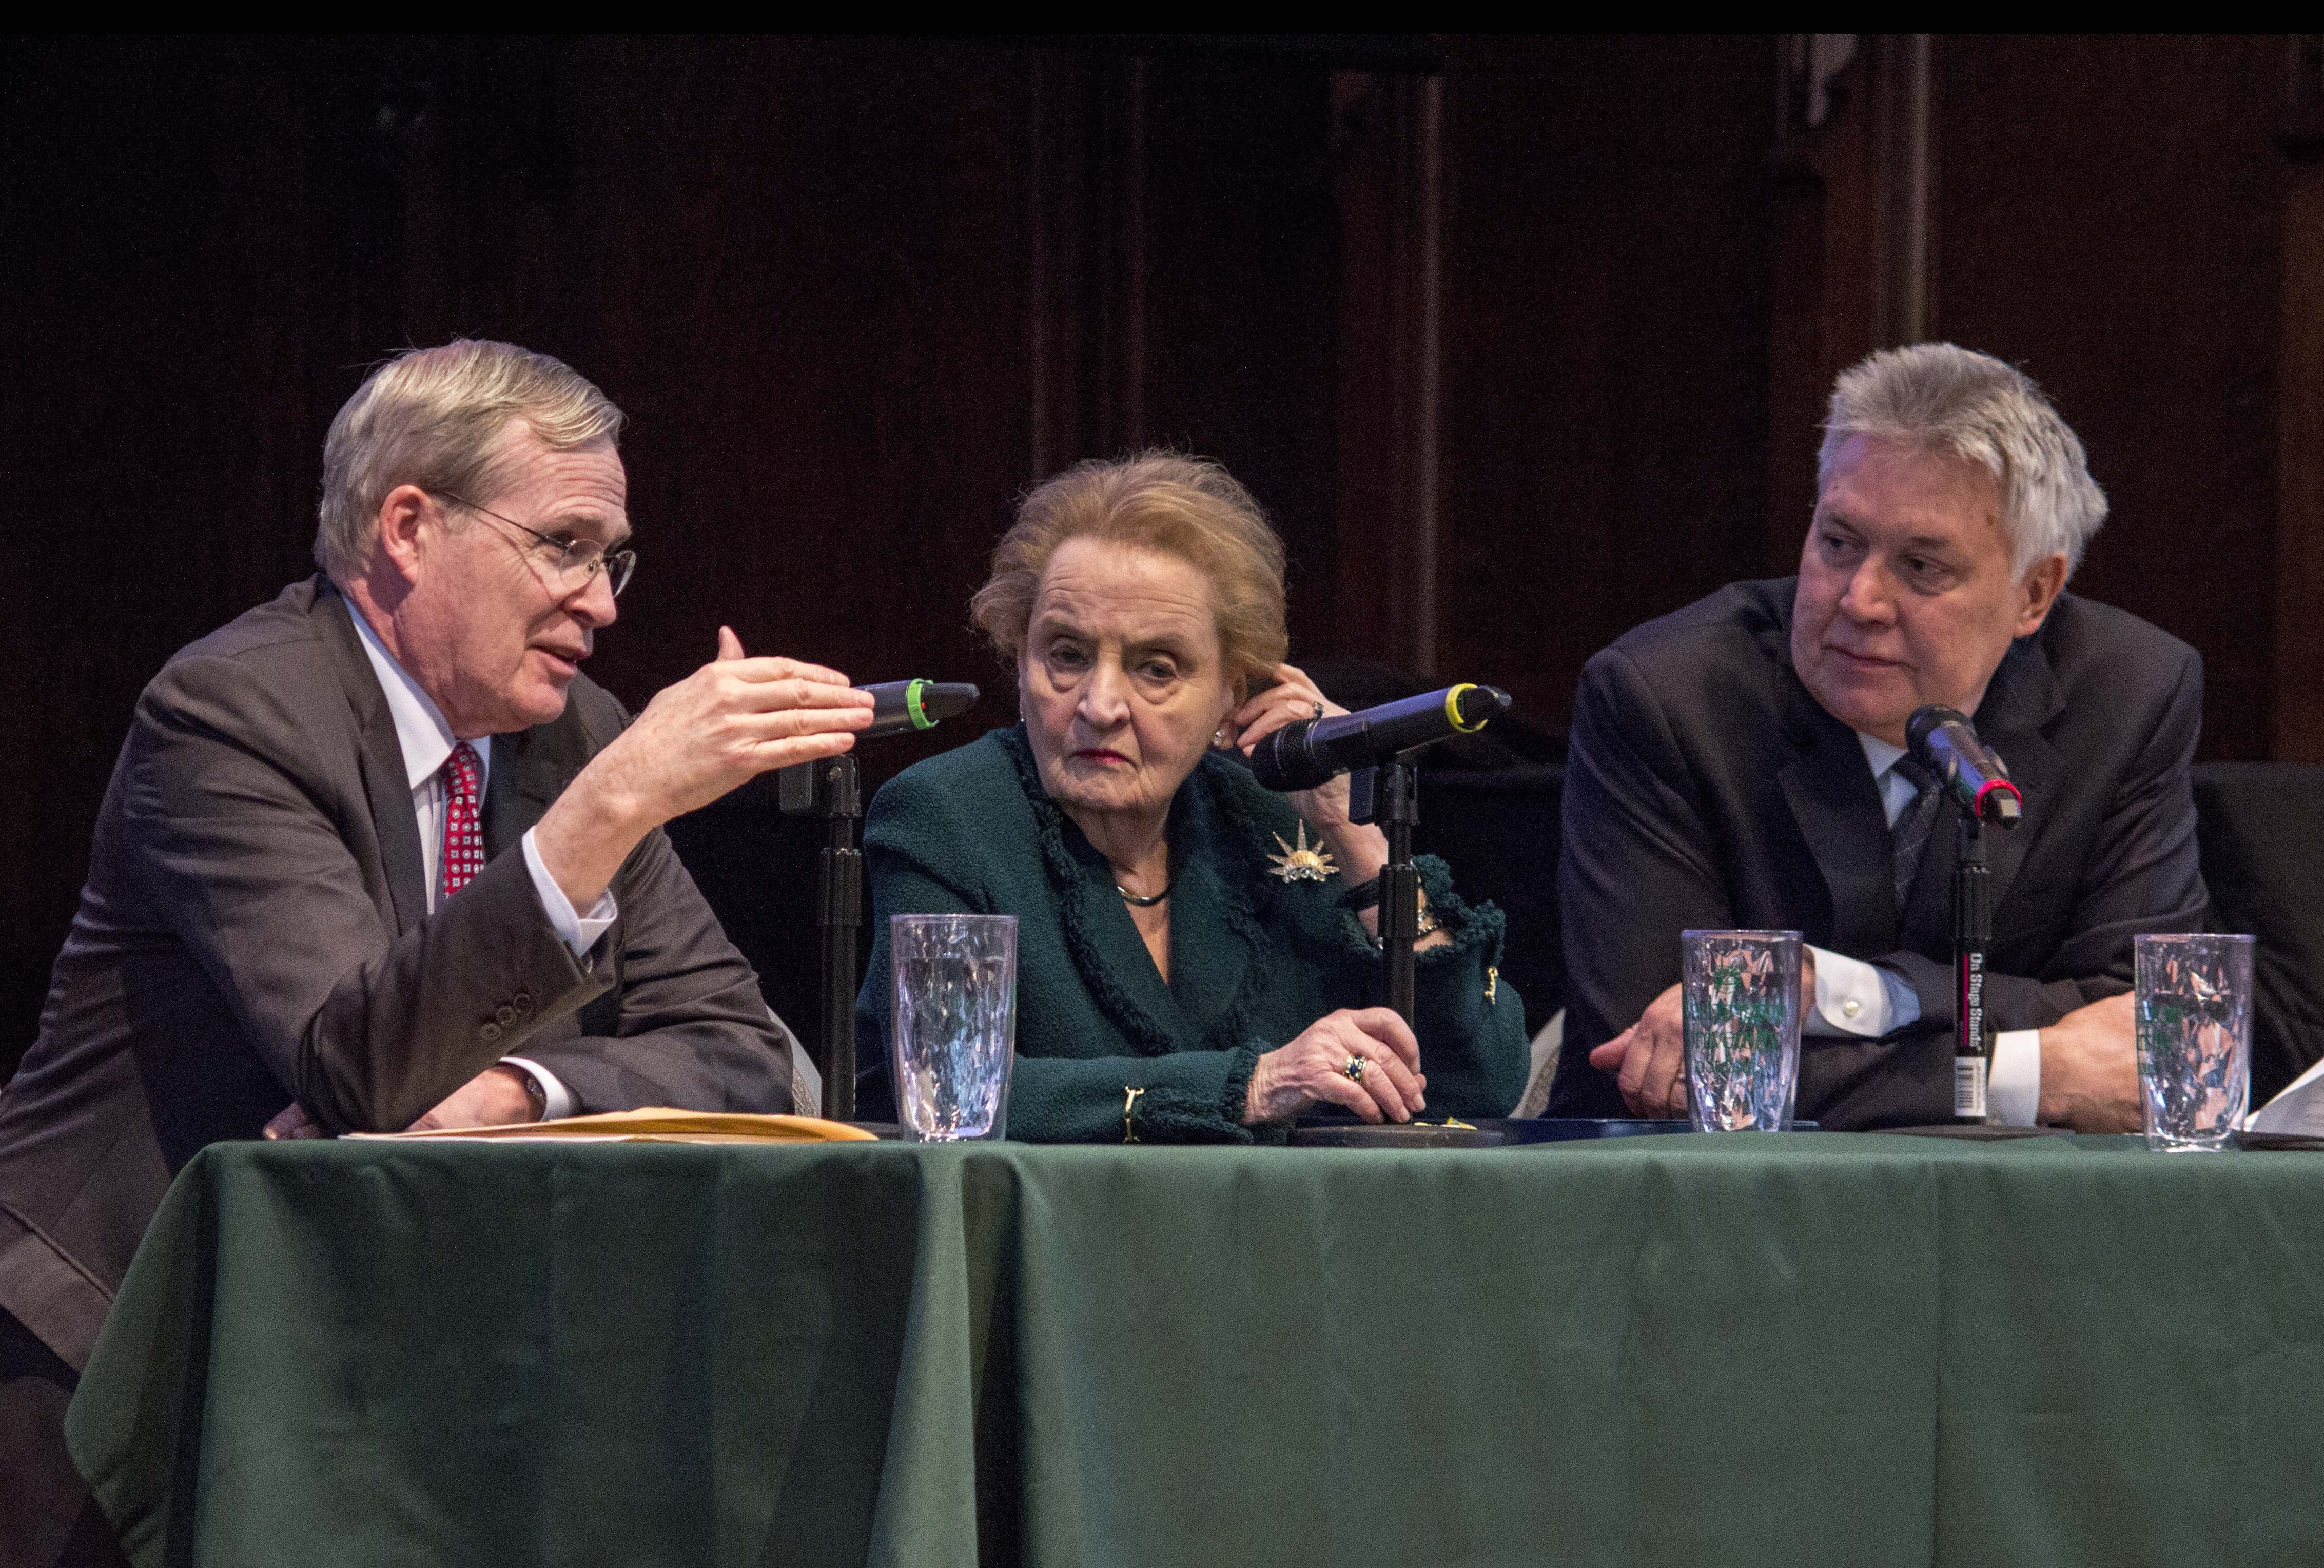 Former National Security Advisor Stephen Hadley, former Secretary of State Madeleine Albright, and Pulitzer Center Executive Director Jon Sawyer at Washington University discussing A New Approach to the Middle East. United States, 2017.